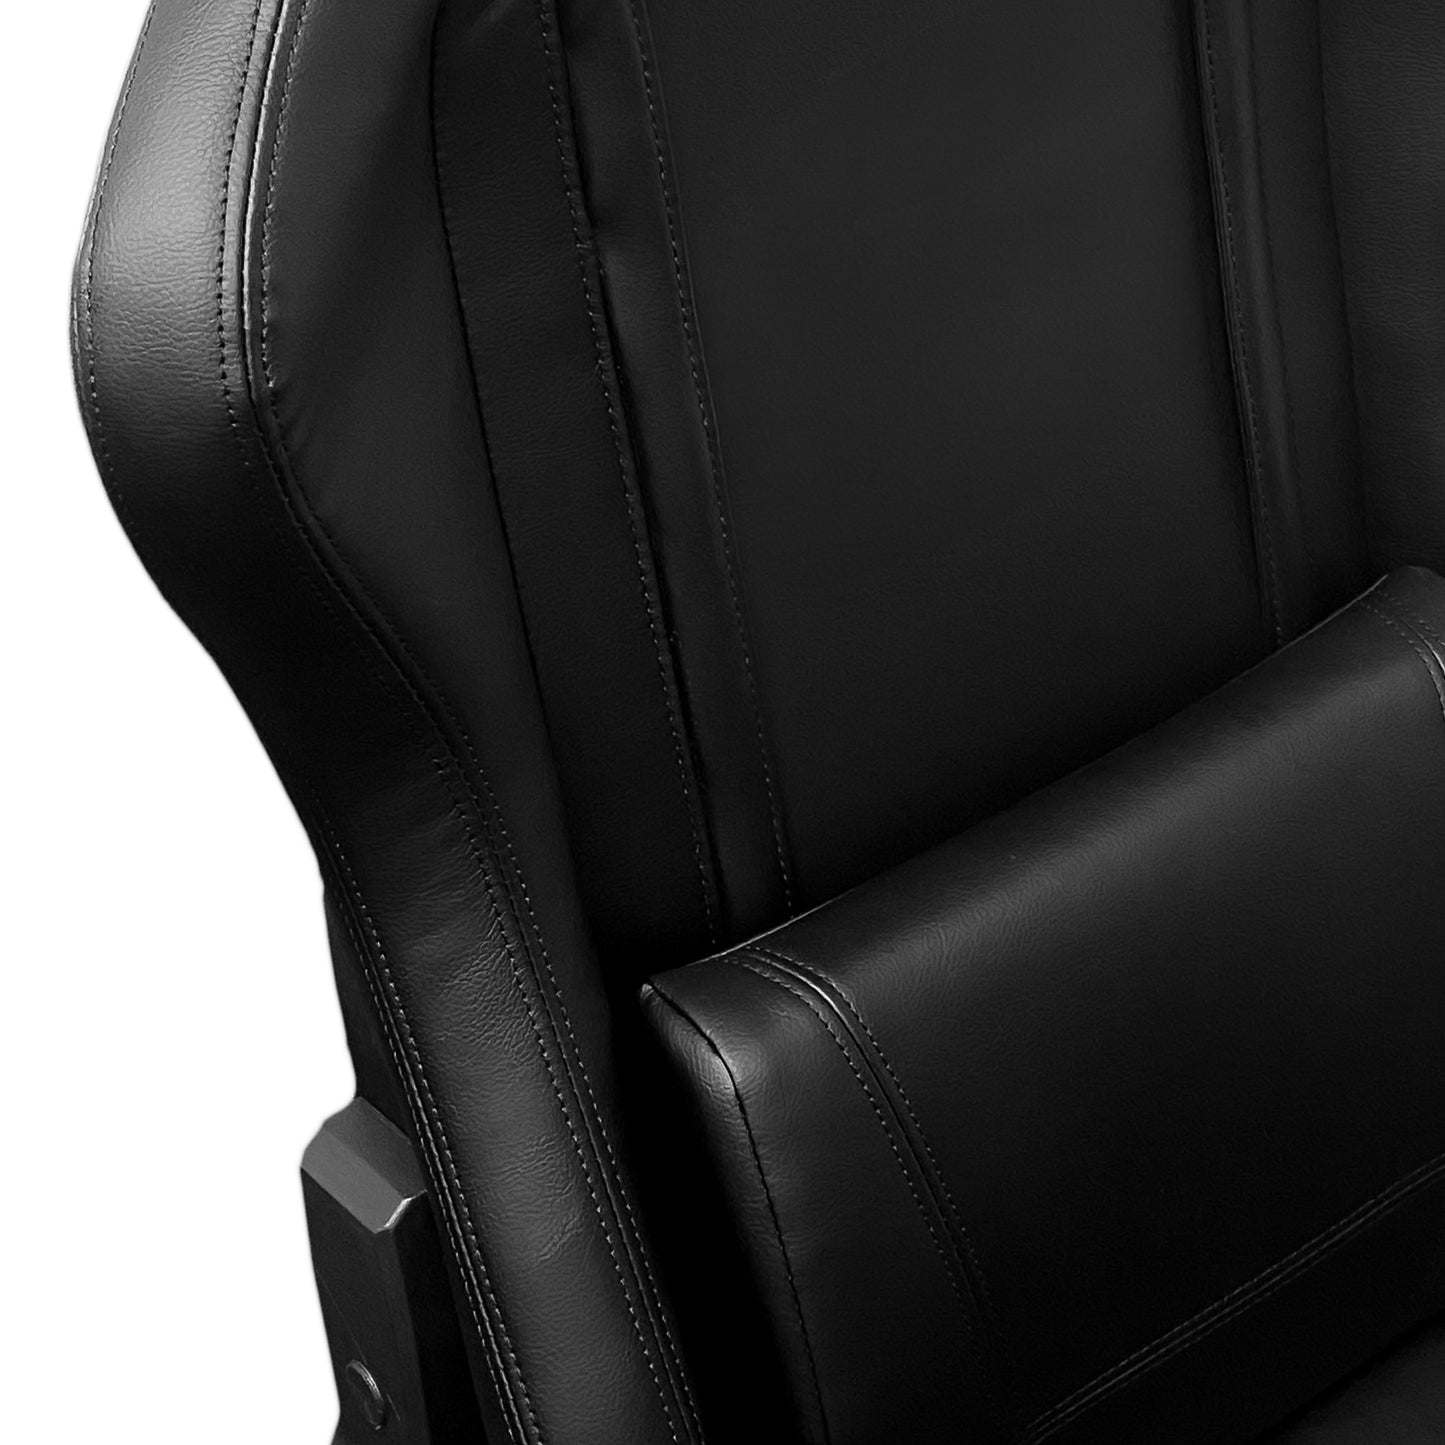 Xpression Pro Gaming Chair with Major League Soccer Logo